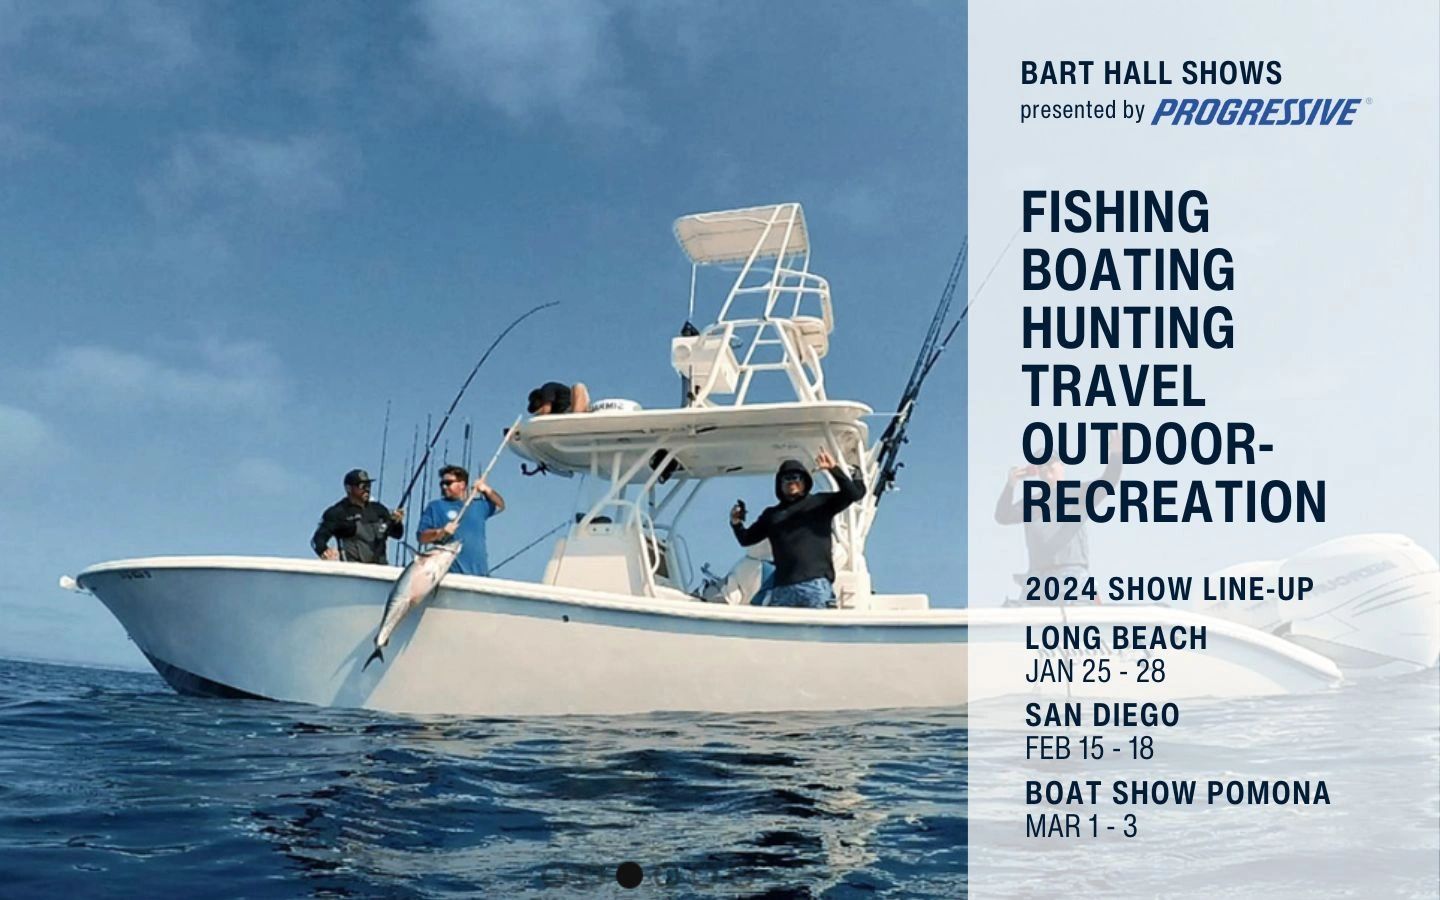 The BART HALL SHOW DEL MAR Starts Thursday. Come see us and grab one of the  thousands of rods or reels we have on sale at the show. Of c, united  composite